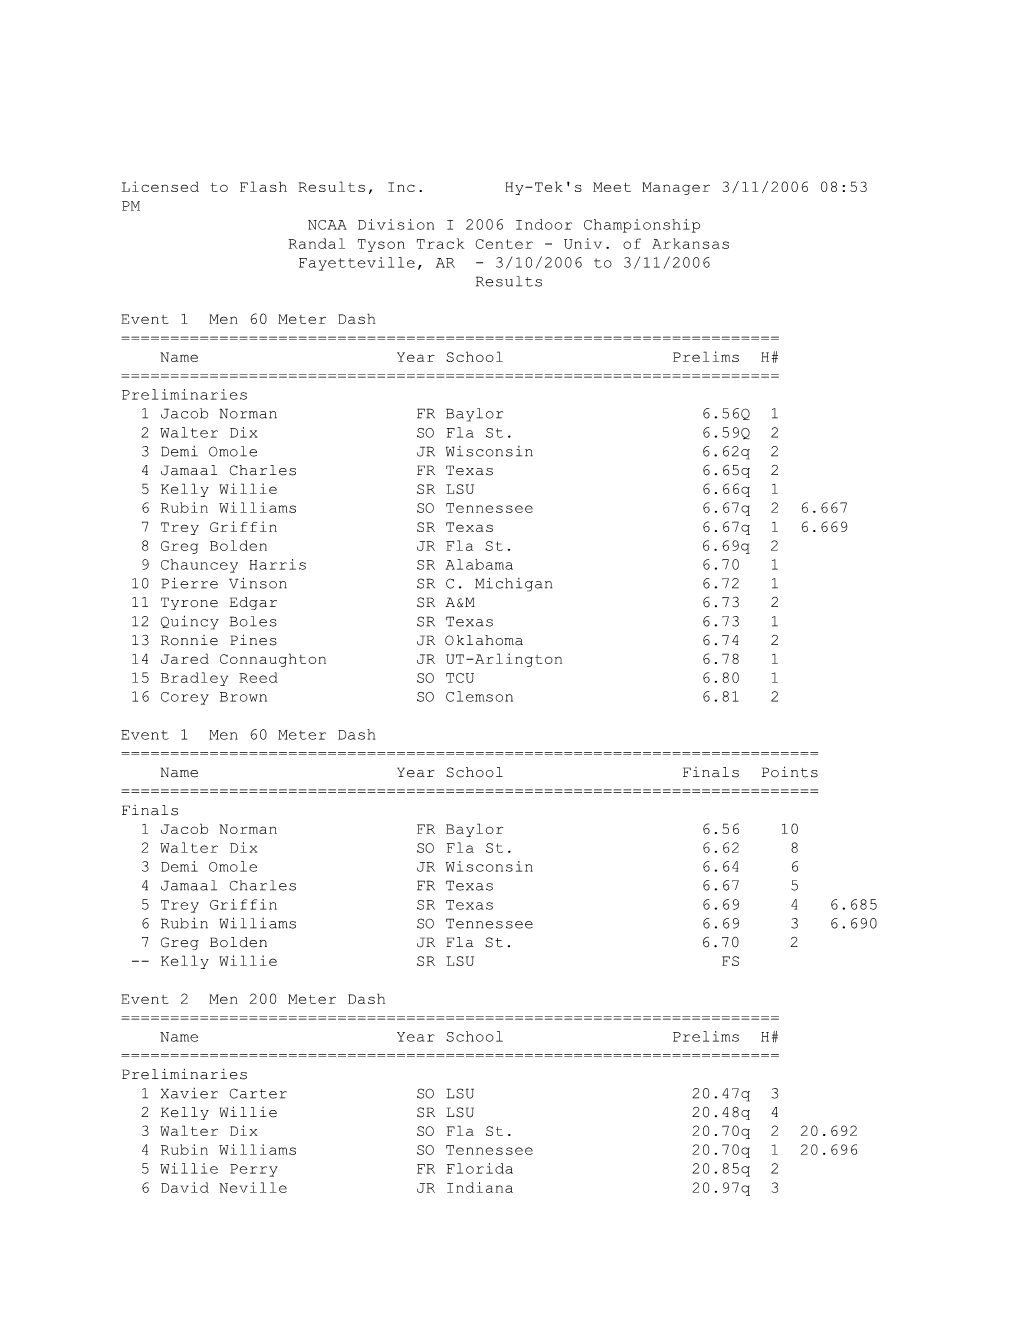 Licensed to Flash Results, Inc. Hy-Tek's Meet Manager 3/11/2006 08:53 PM NCAA Division I 2006 Indoor Championship Randal Tyson Track Center - Univ